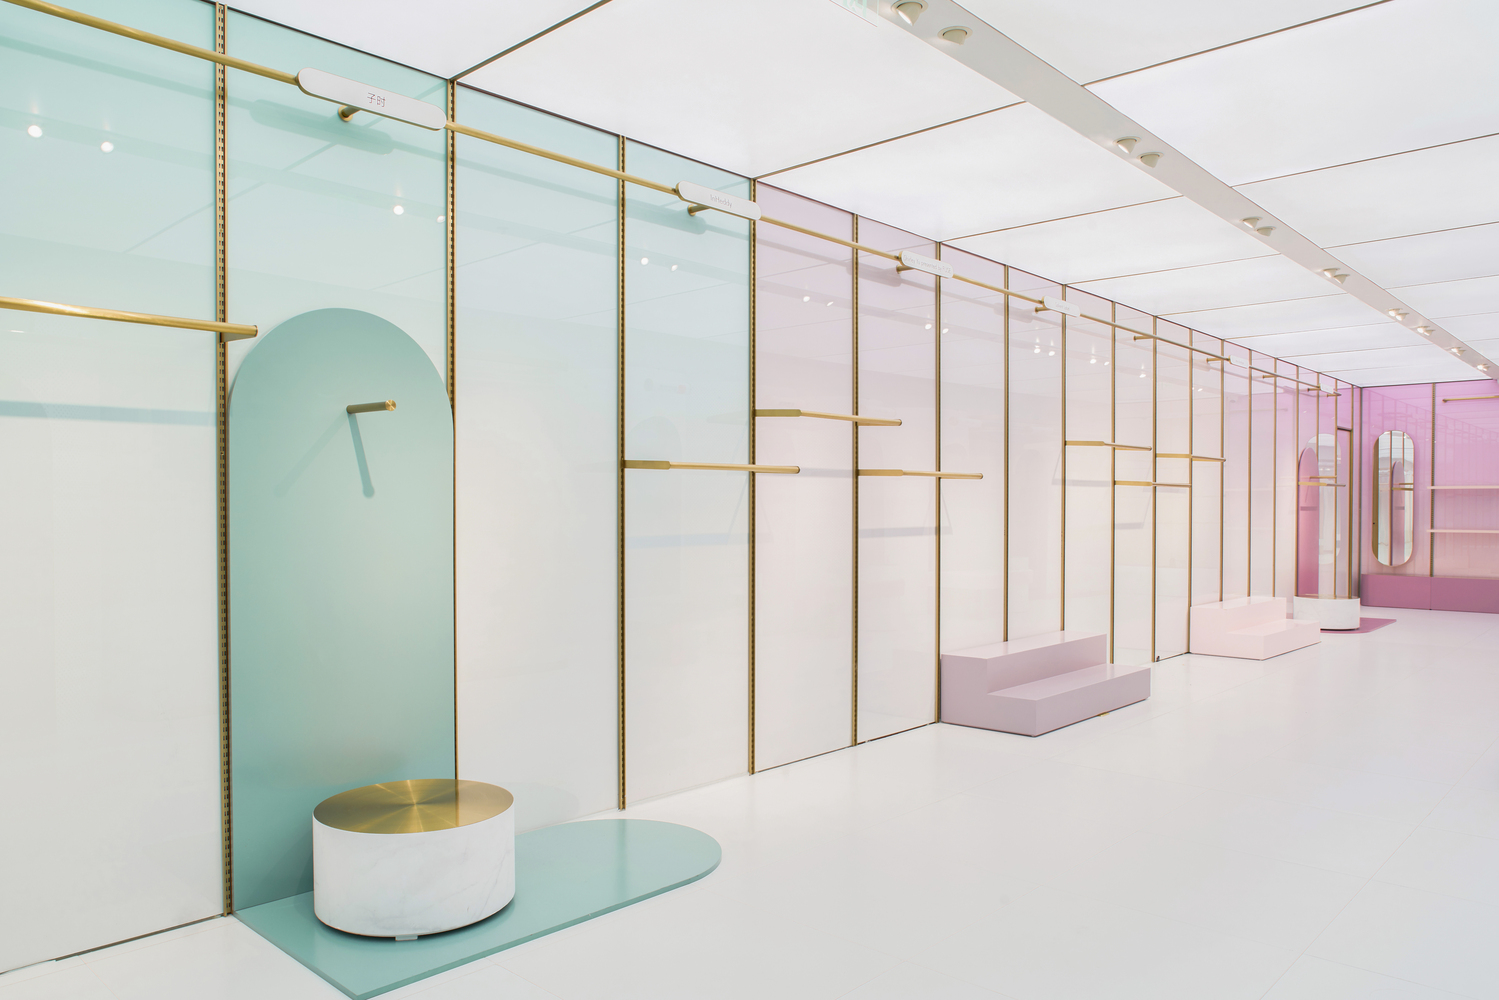 The soft pastel interiors of the new OMO Heyshop in Shanghai, China.  